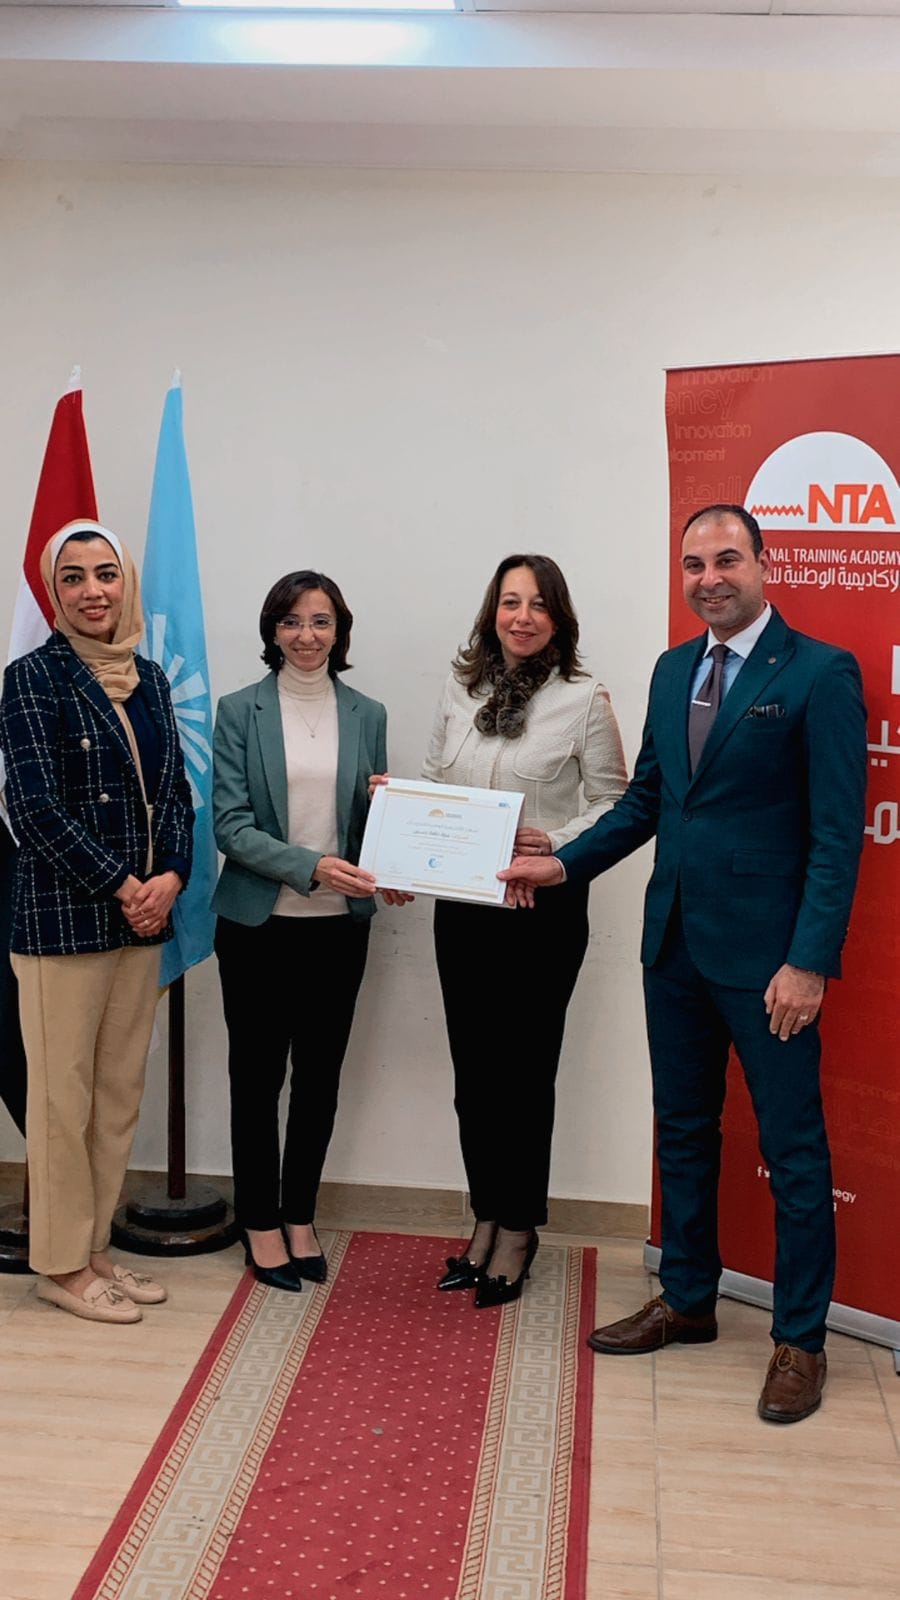 AWIMA congratulate Mrs.Marwa Hafez, a member of the Egyptian national entity, for passing the presidential program for women leading in the Egyptian governorates from the National Training Academy